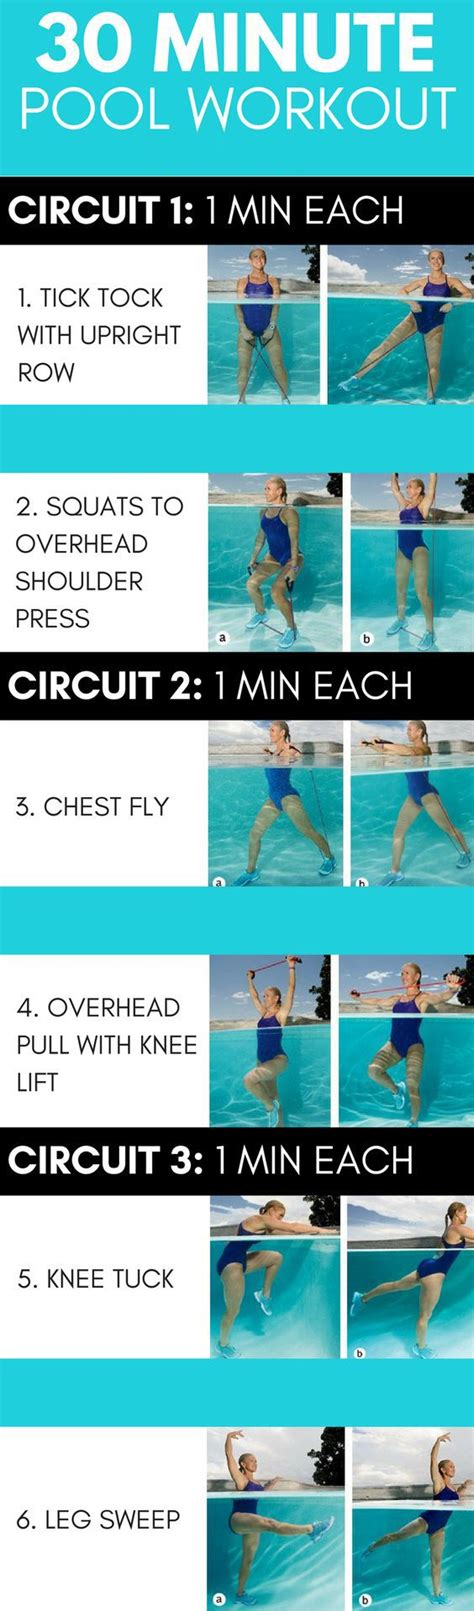 30 Min Water Workout Posted By Pool